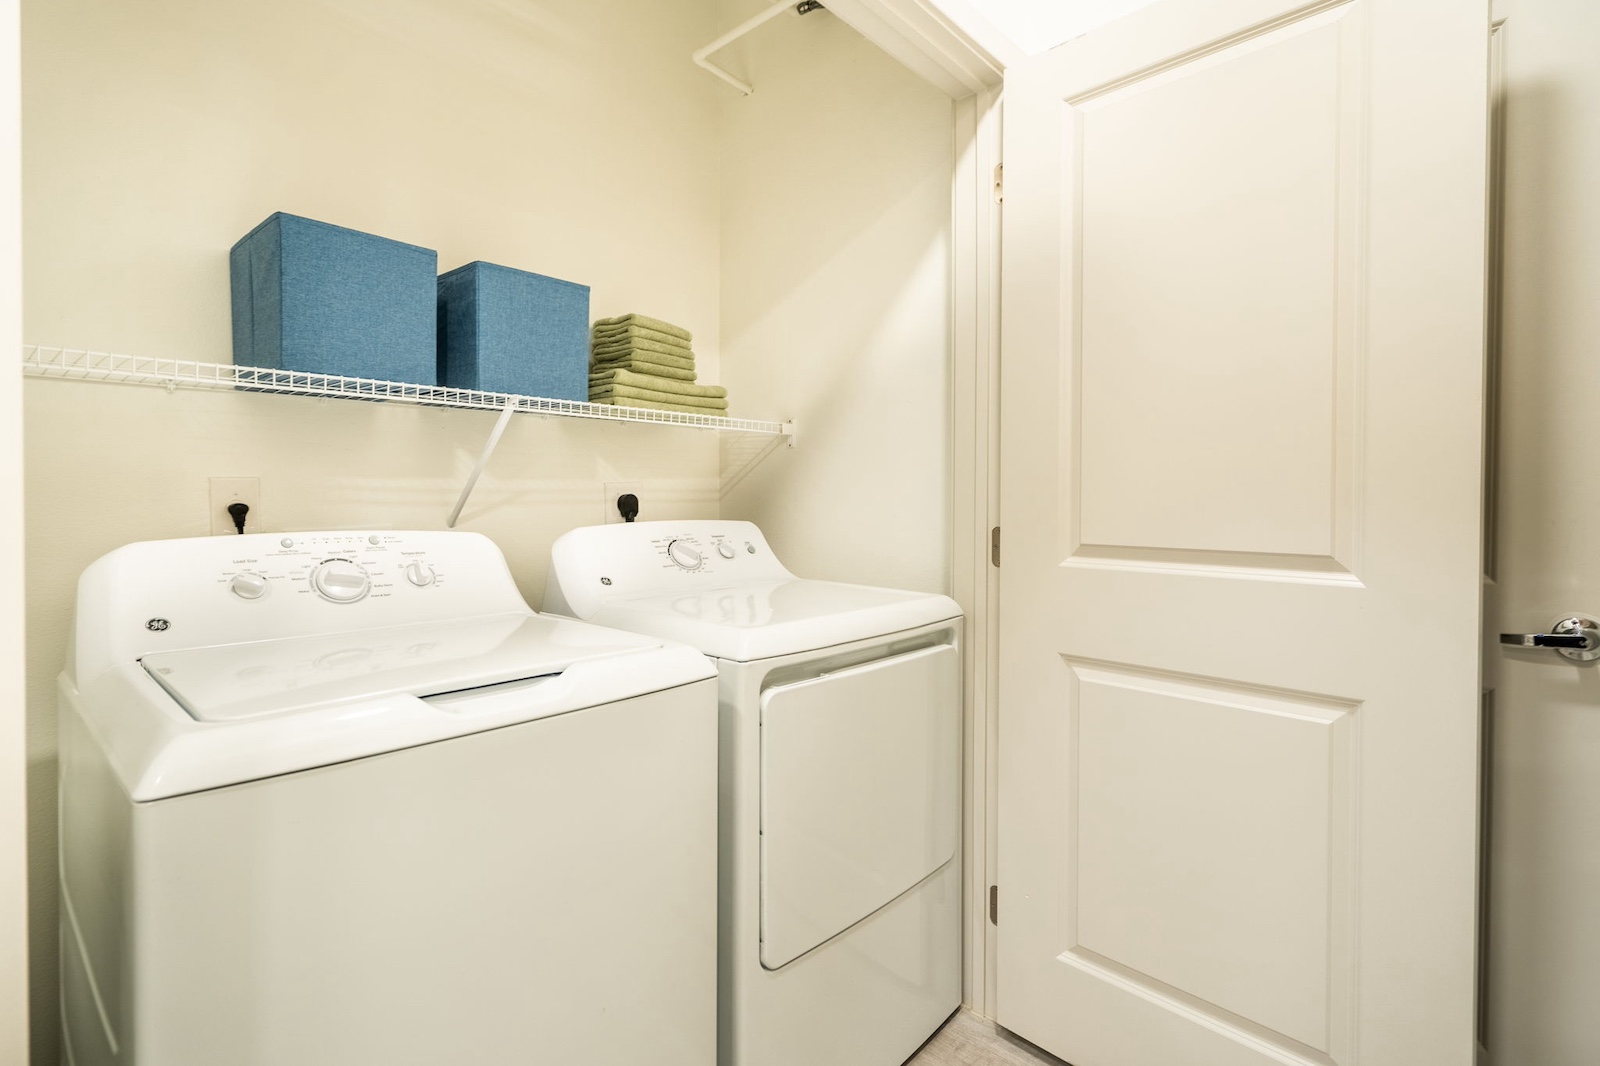 Energy Star full-size washer and dryer at our apartments for rent in Cypress. Residences